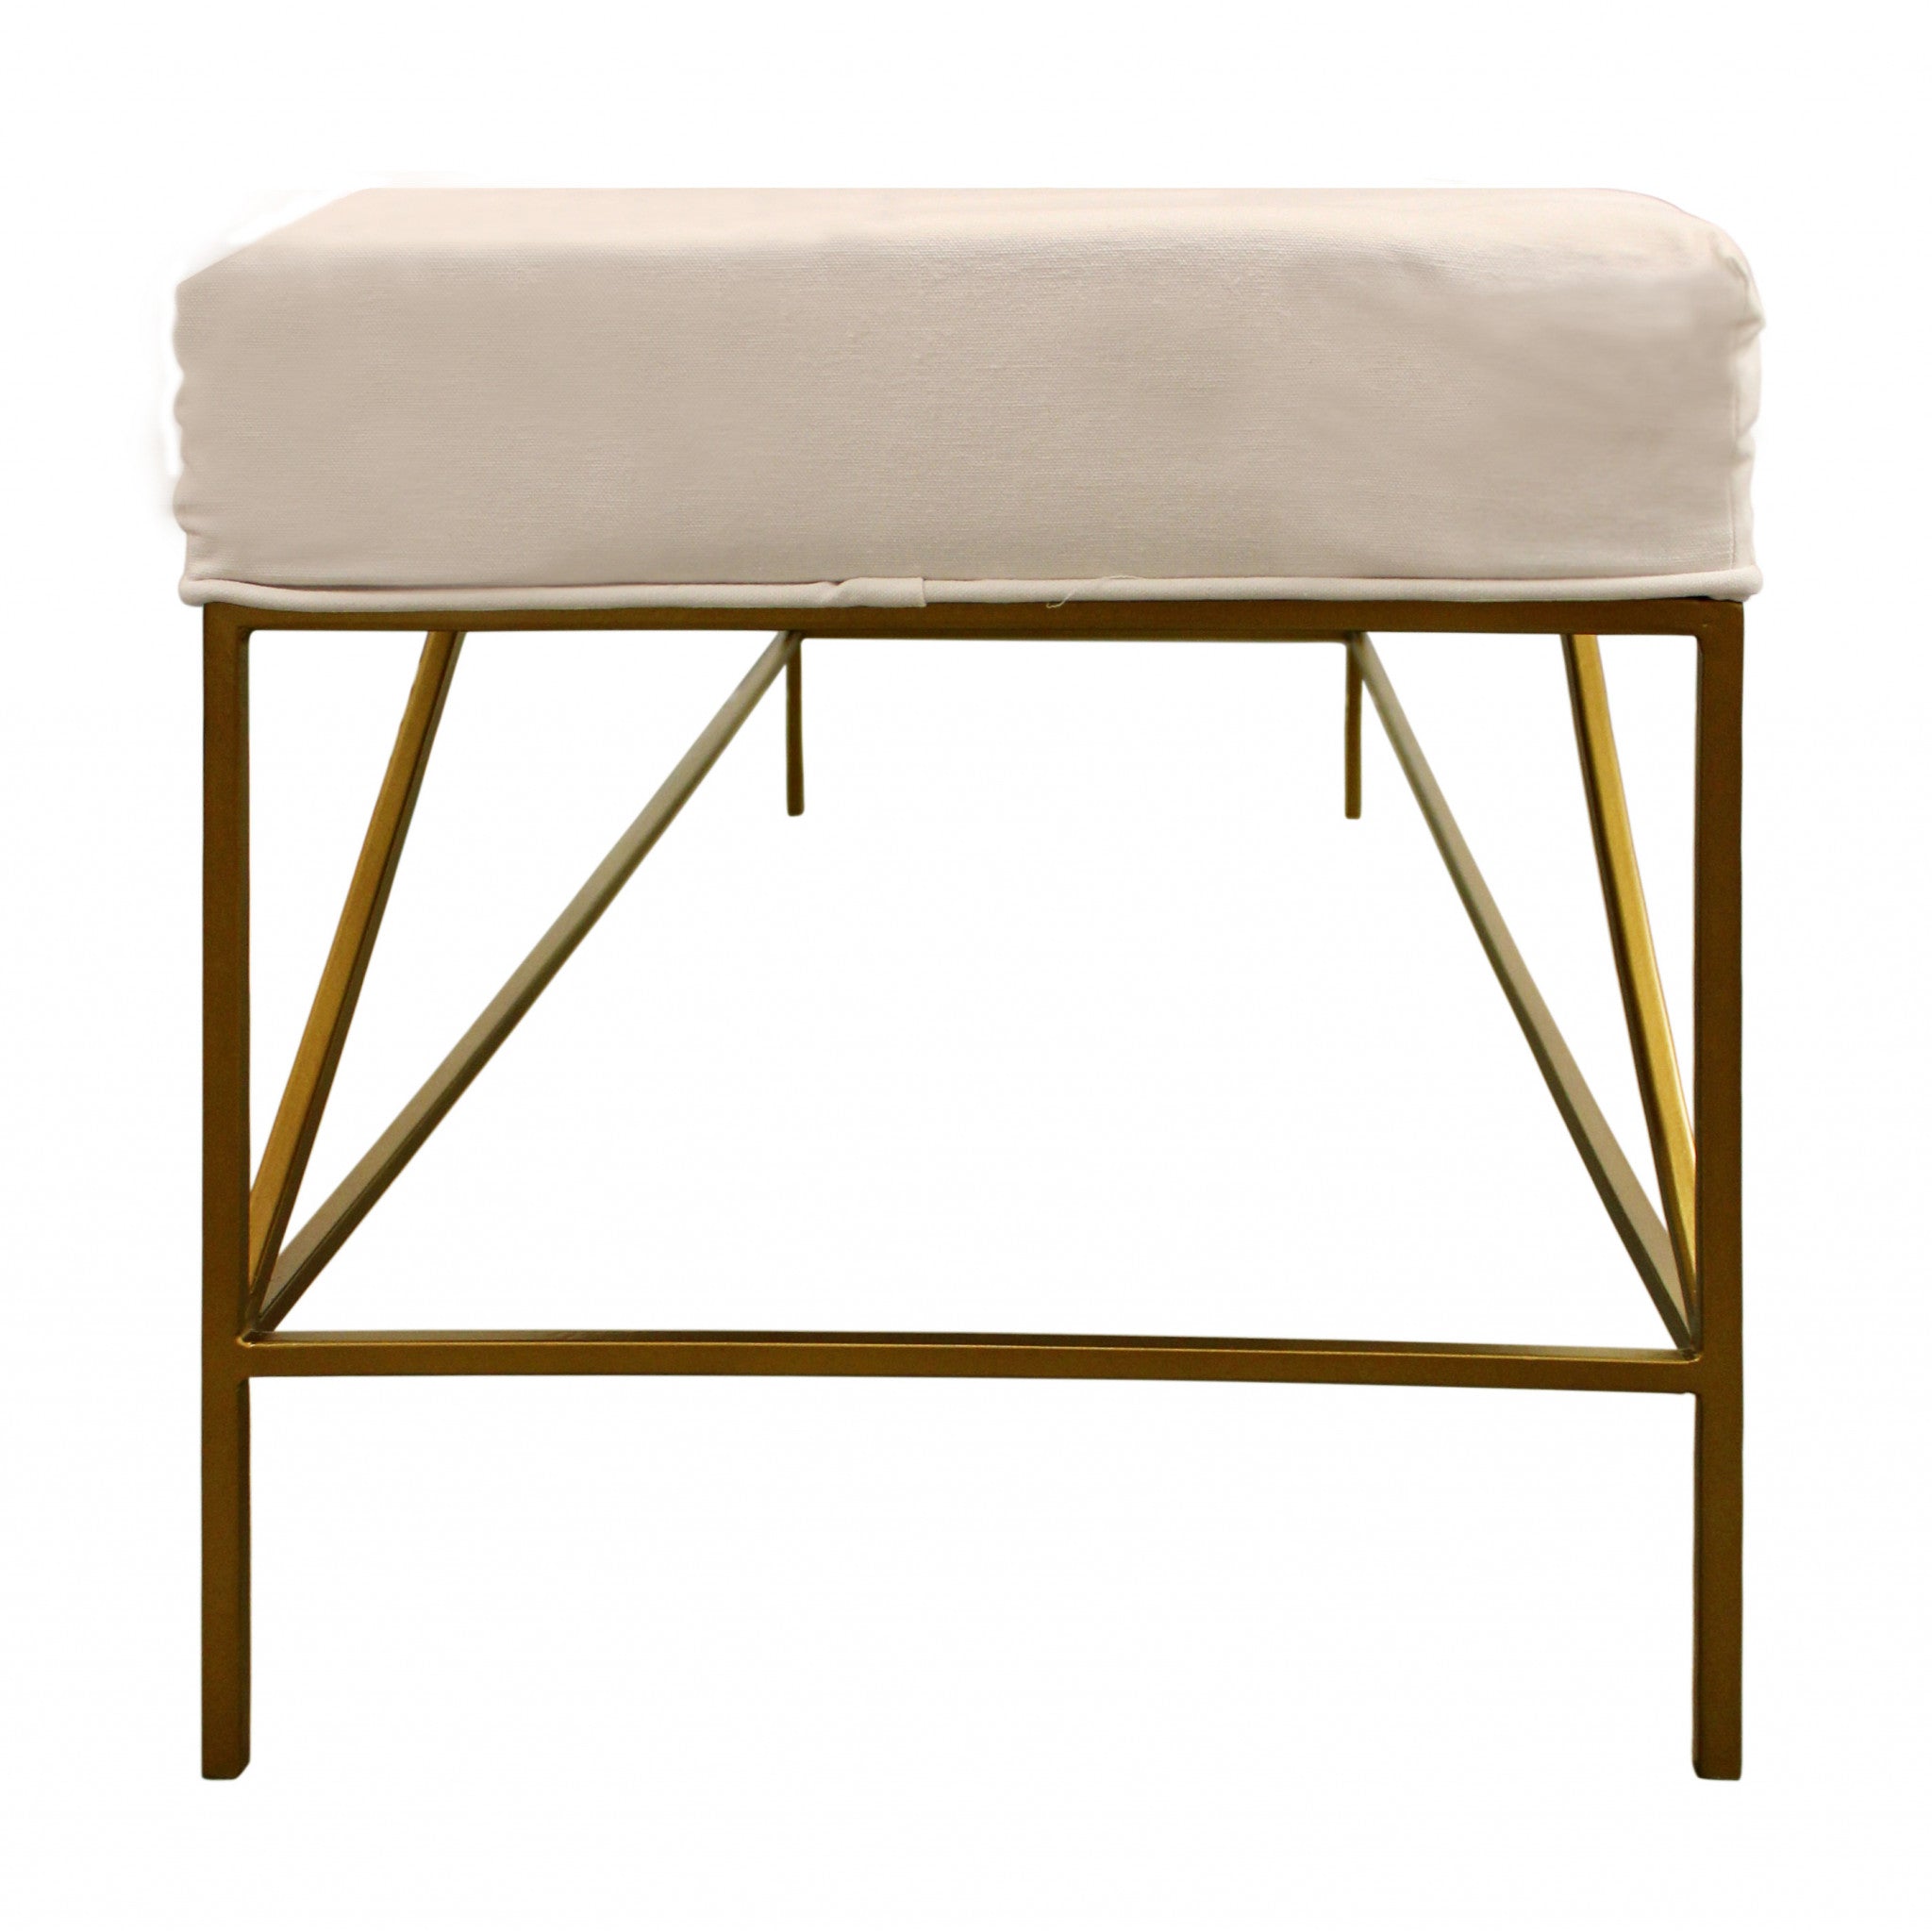 58" Ivory And Gold 100% Linen Upholstered Entryway Bench